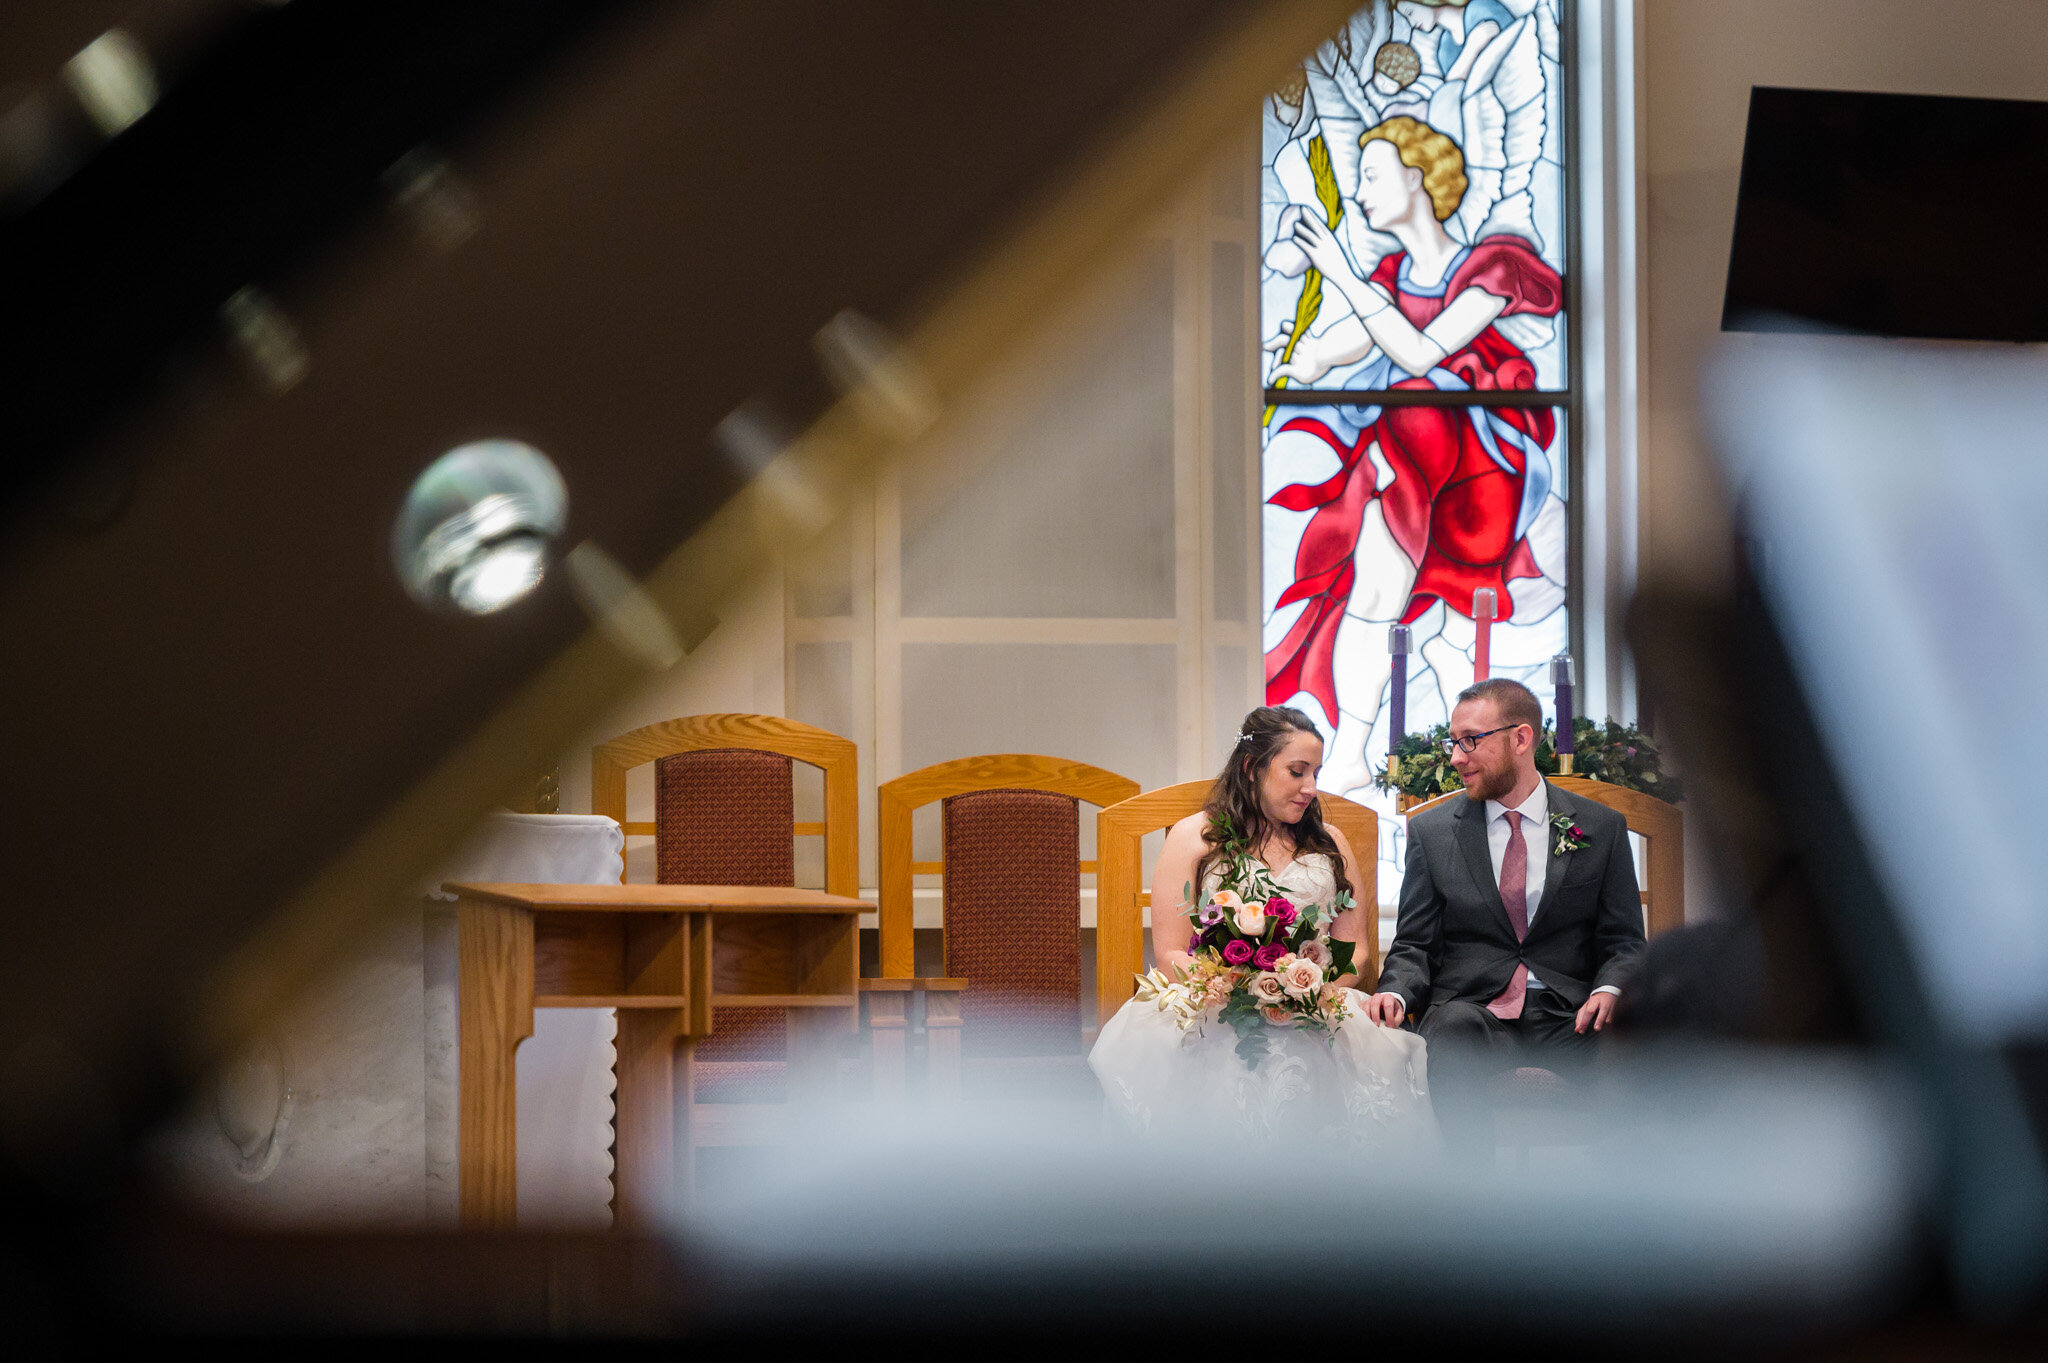 The bride and groom sharing a quiet moment during their Catholic wedding ceremony.